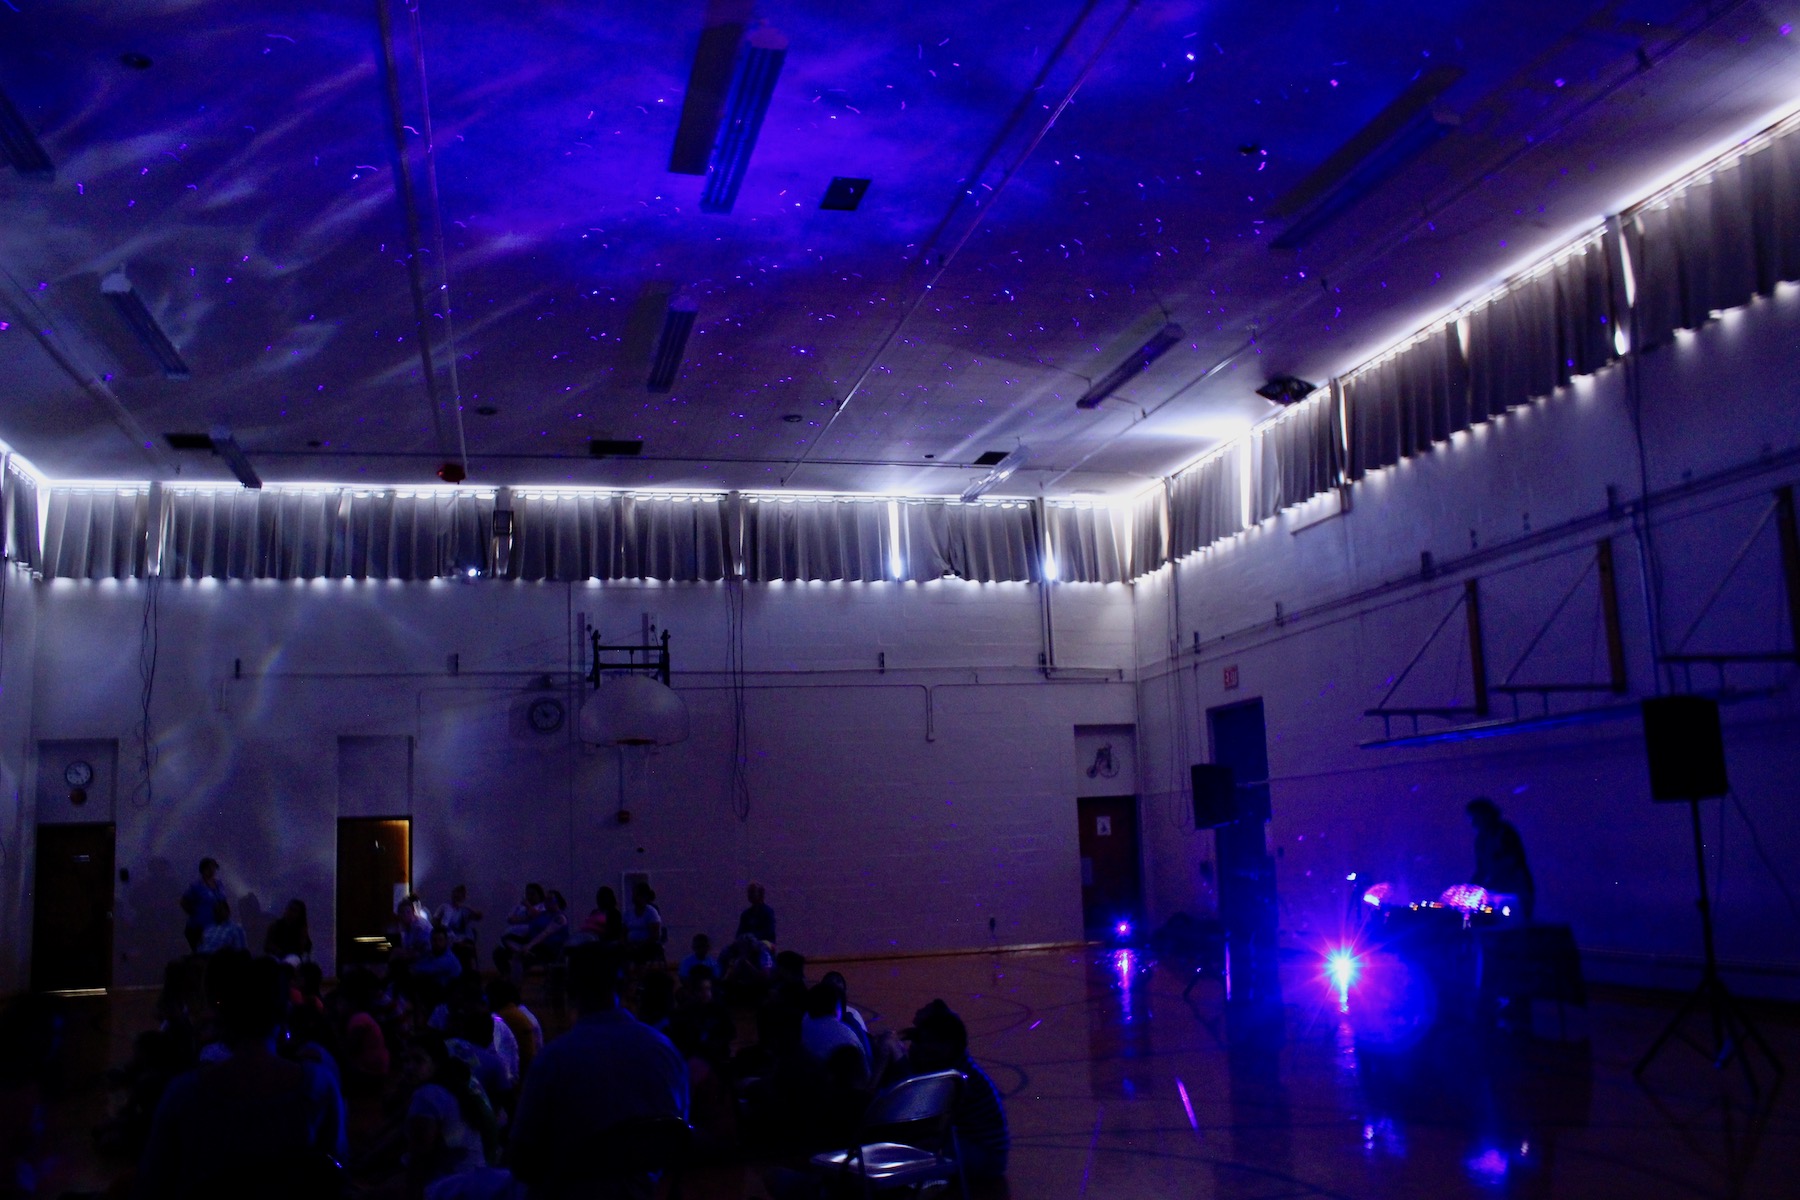 Cedrique performs the audio blanket experience at laurs park elementery school